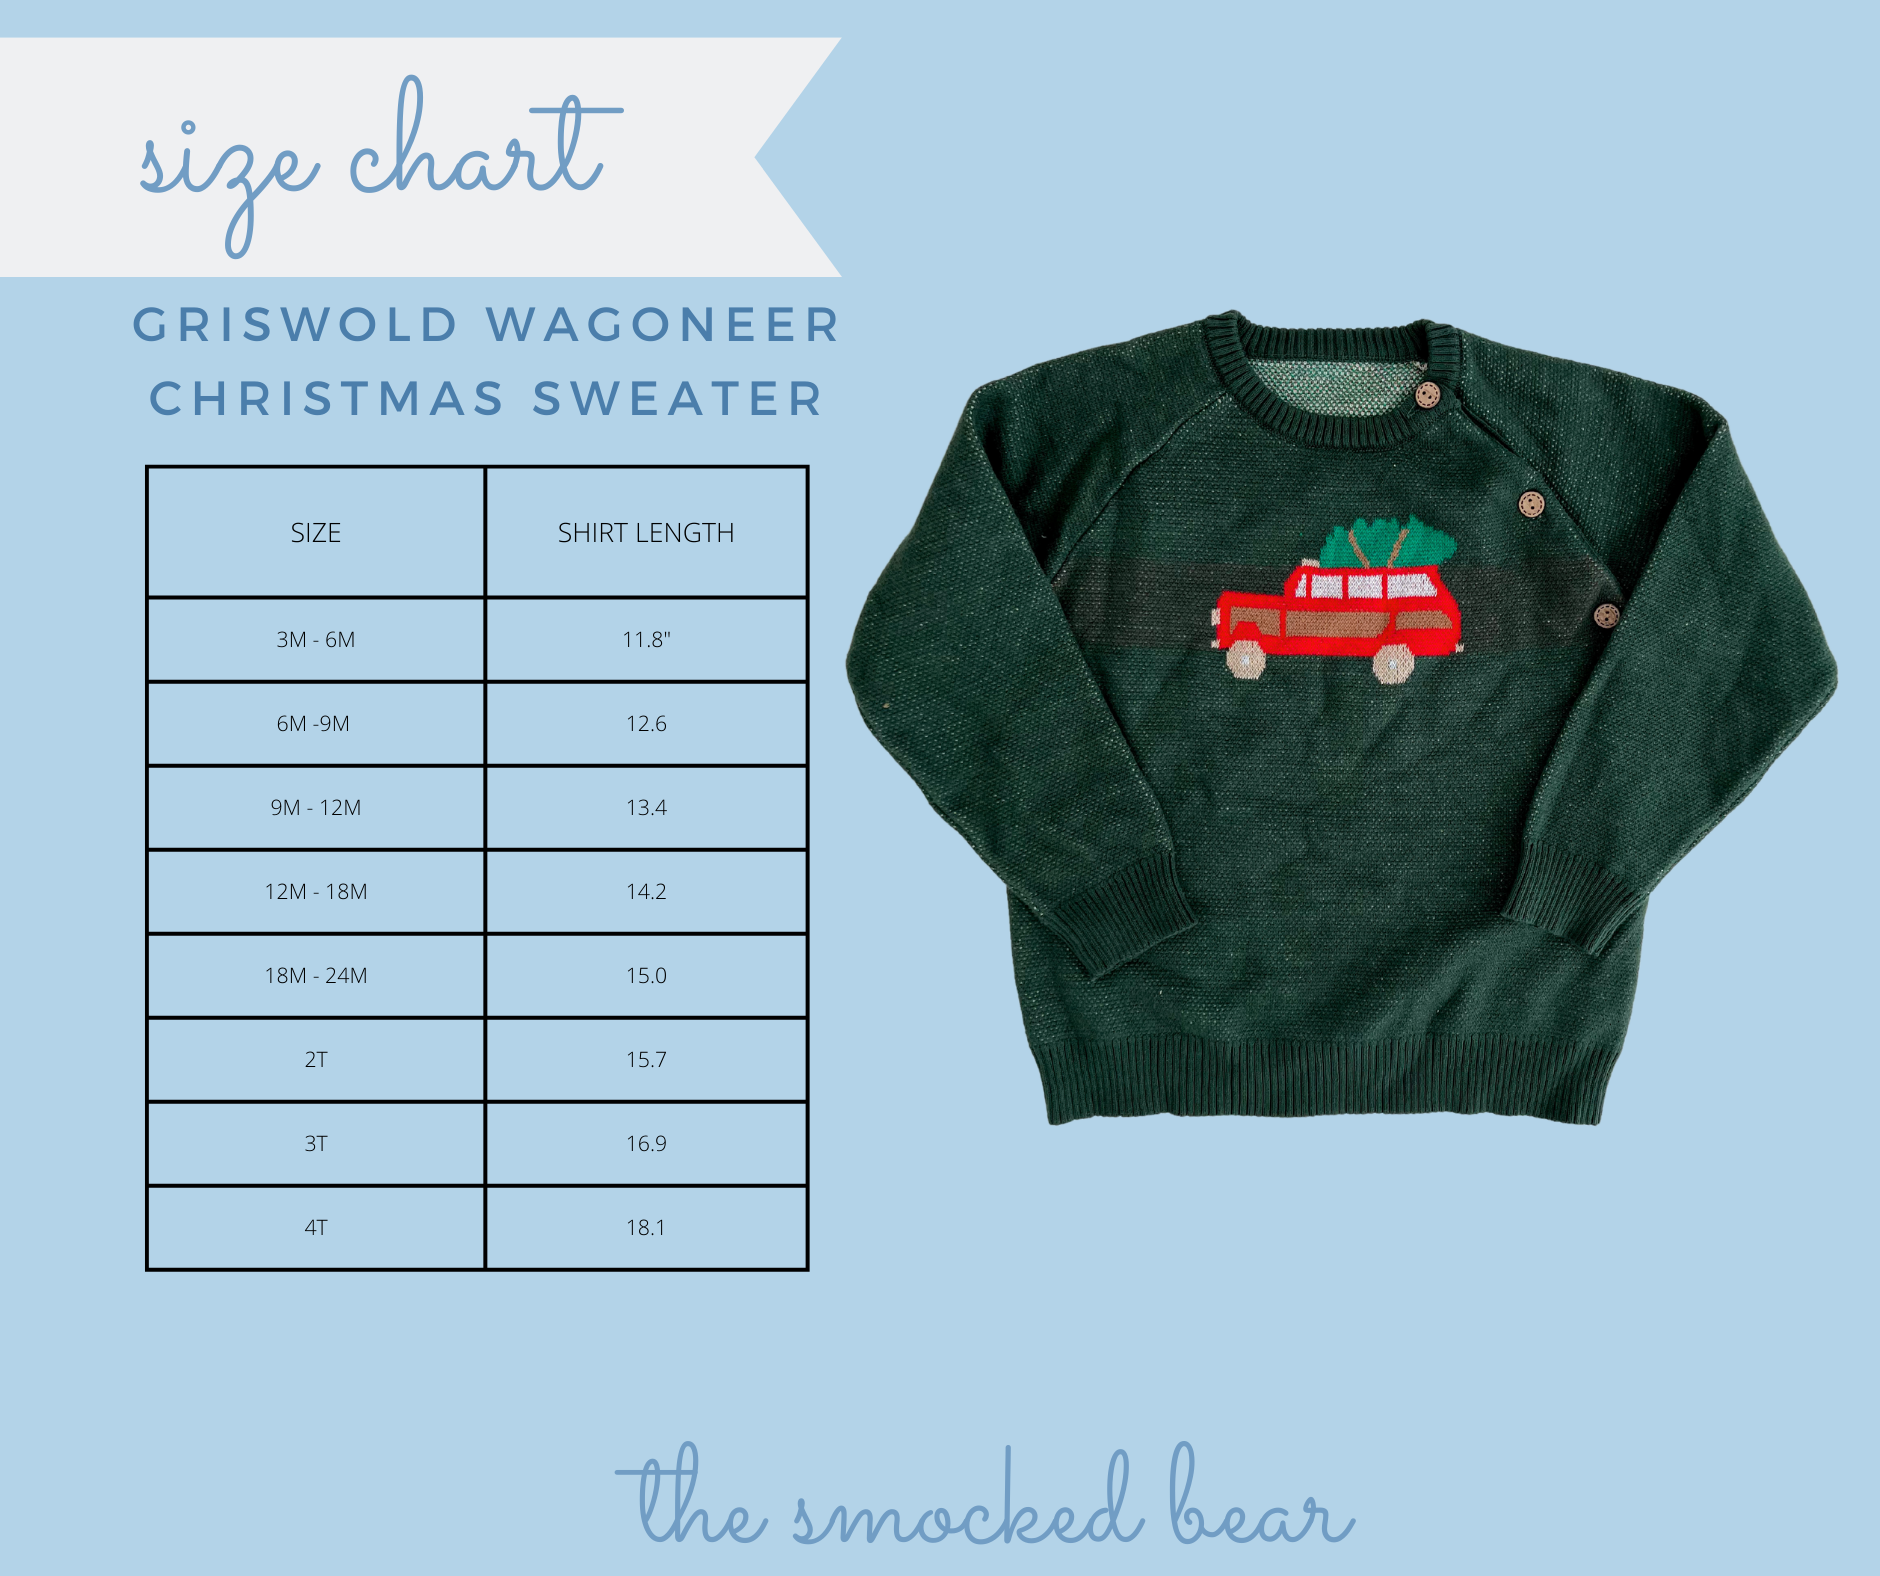 Griswold Wagoneer Christmas Sweater